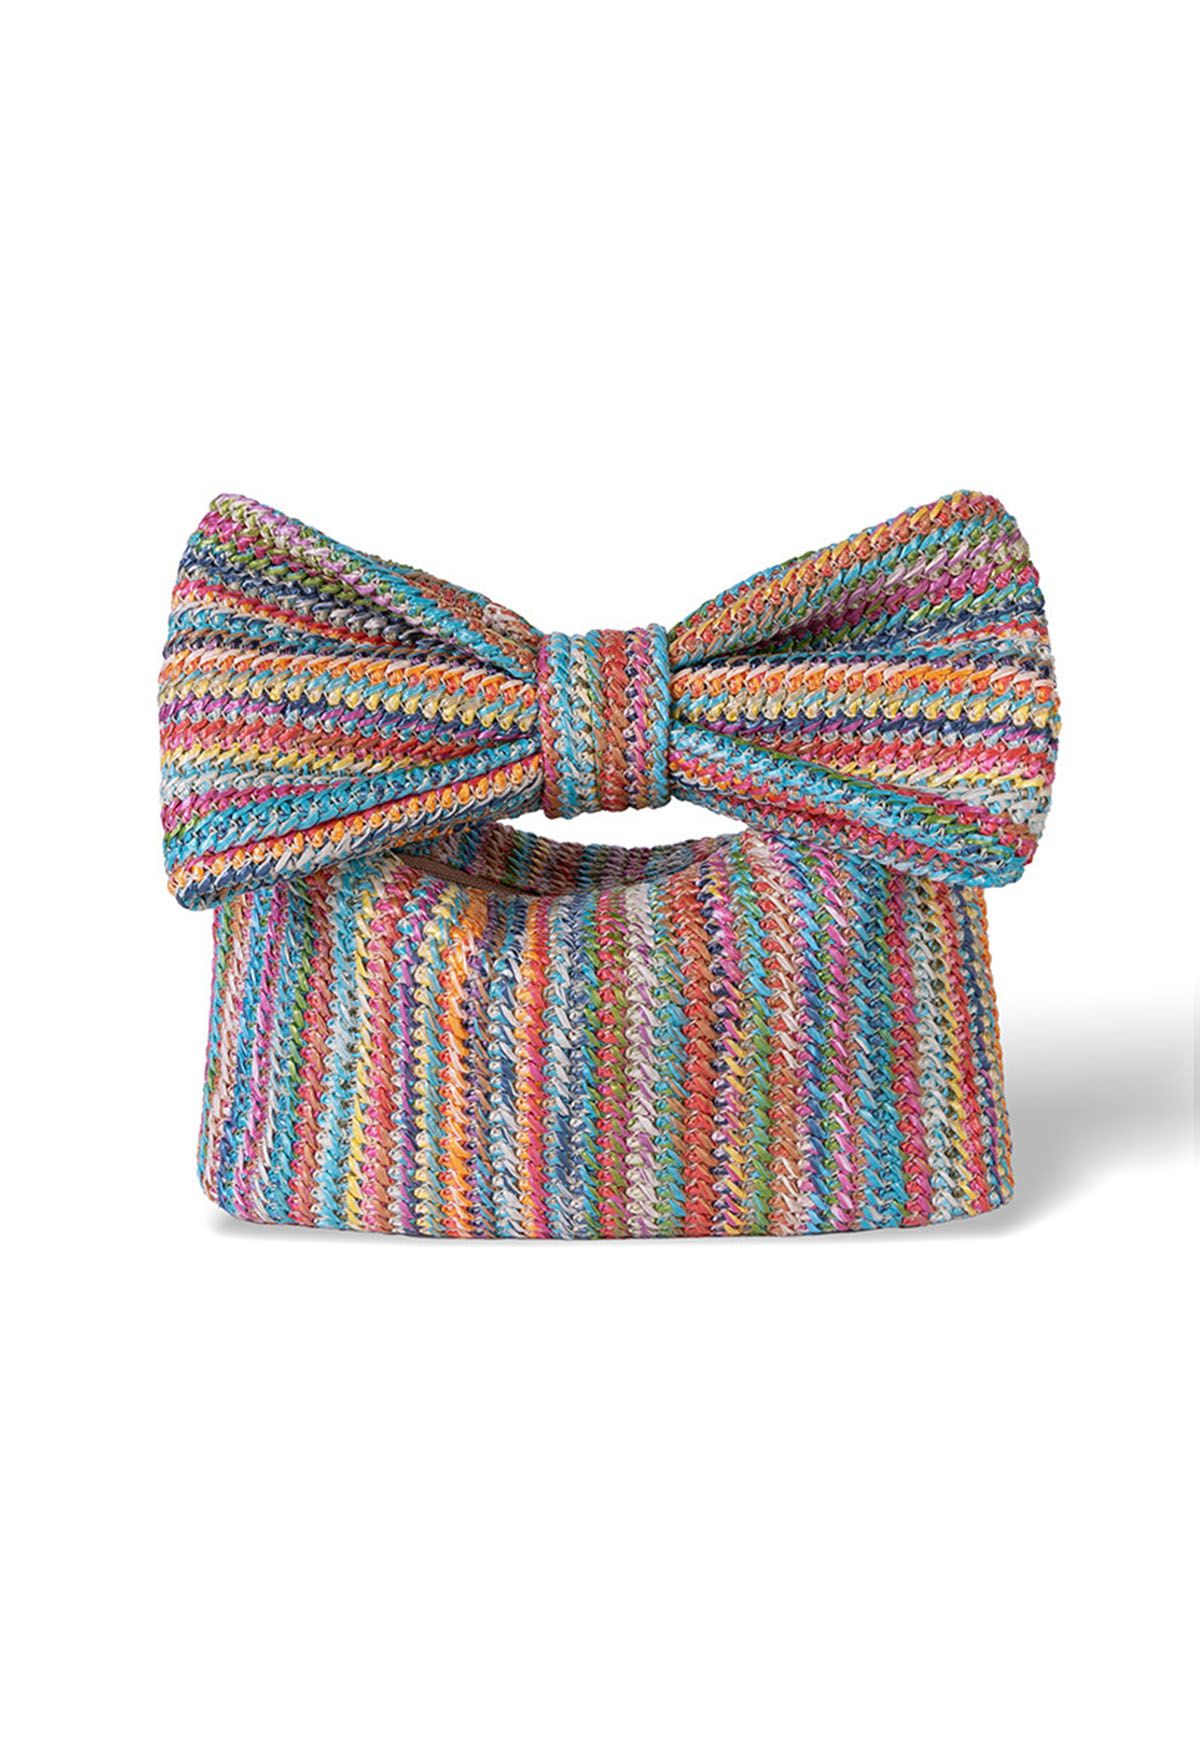 Bowknot Braided Straw Clutch in Multicolor